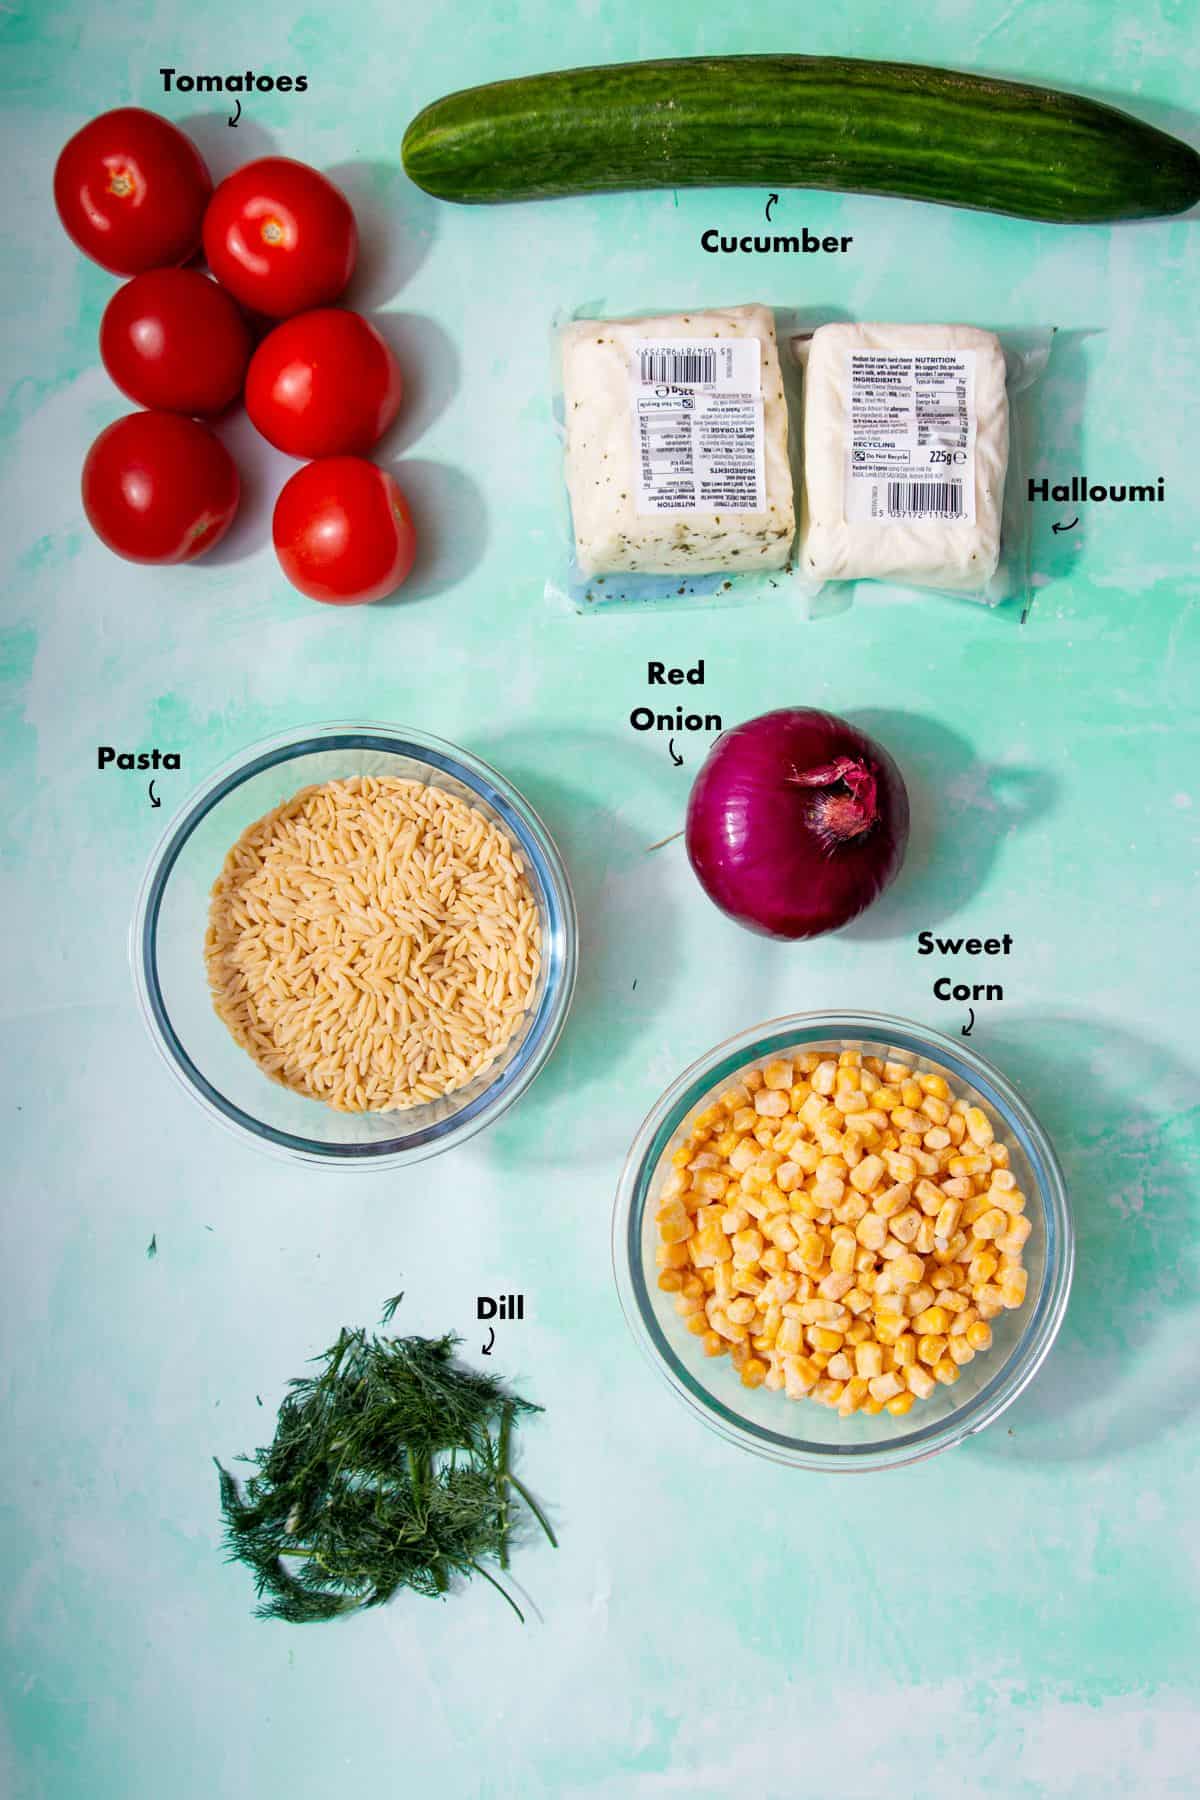 Ingredients to make the halloumi and orzo salad recipe laid out on a pale blue background and labelled.